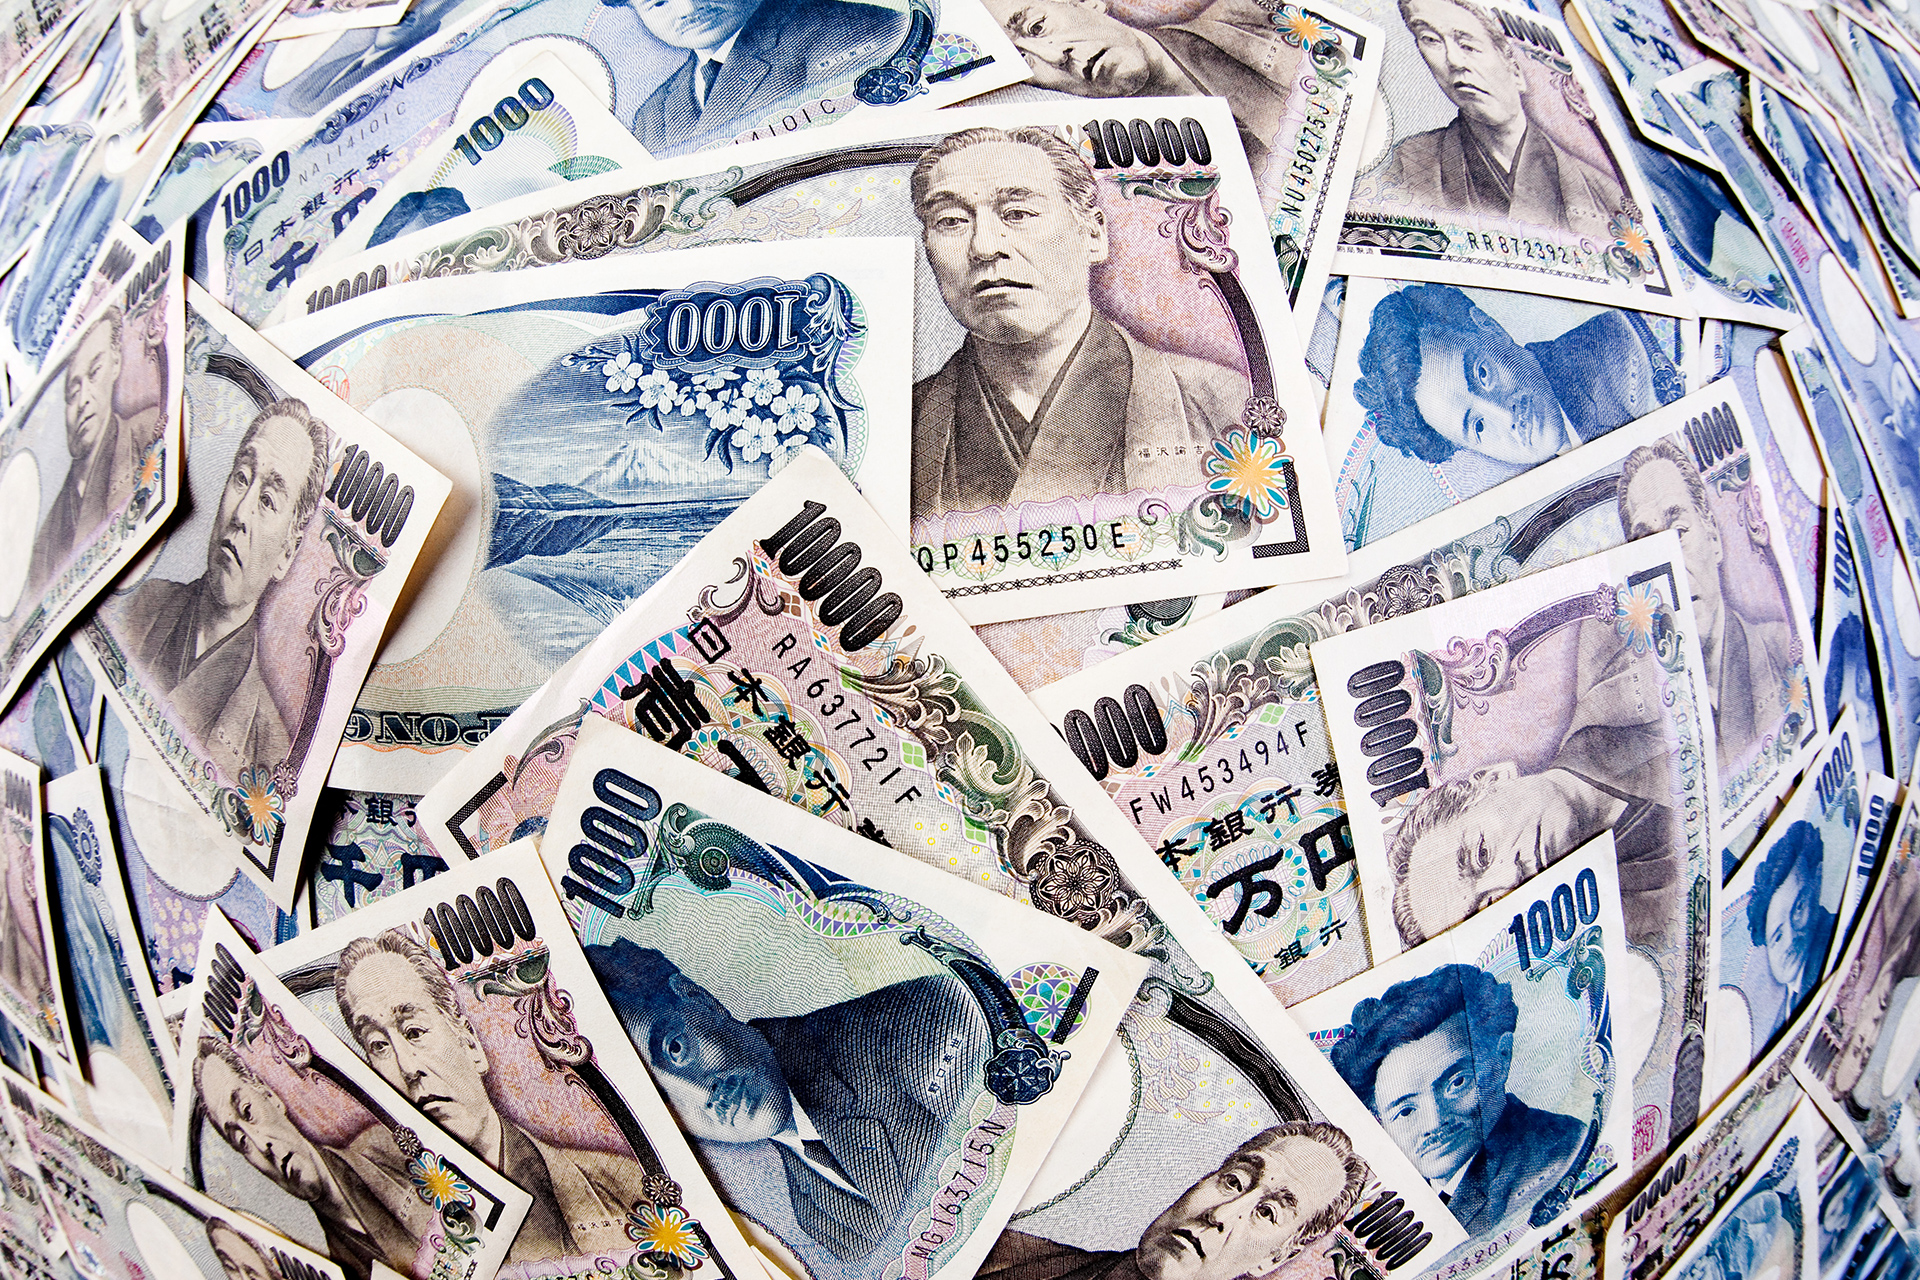 INTERNATIONAL BUSINESS TIMES: Japan-China Tensions Pressure the Yen